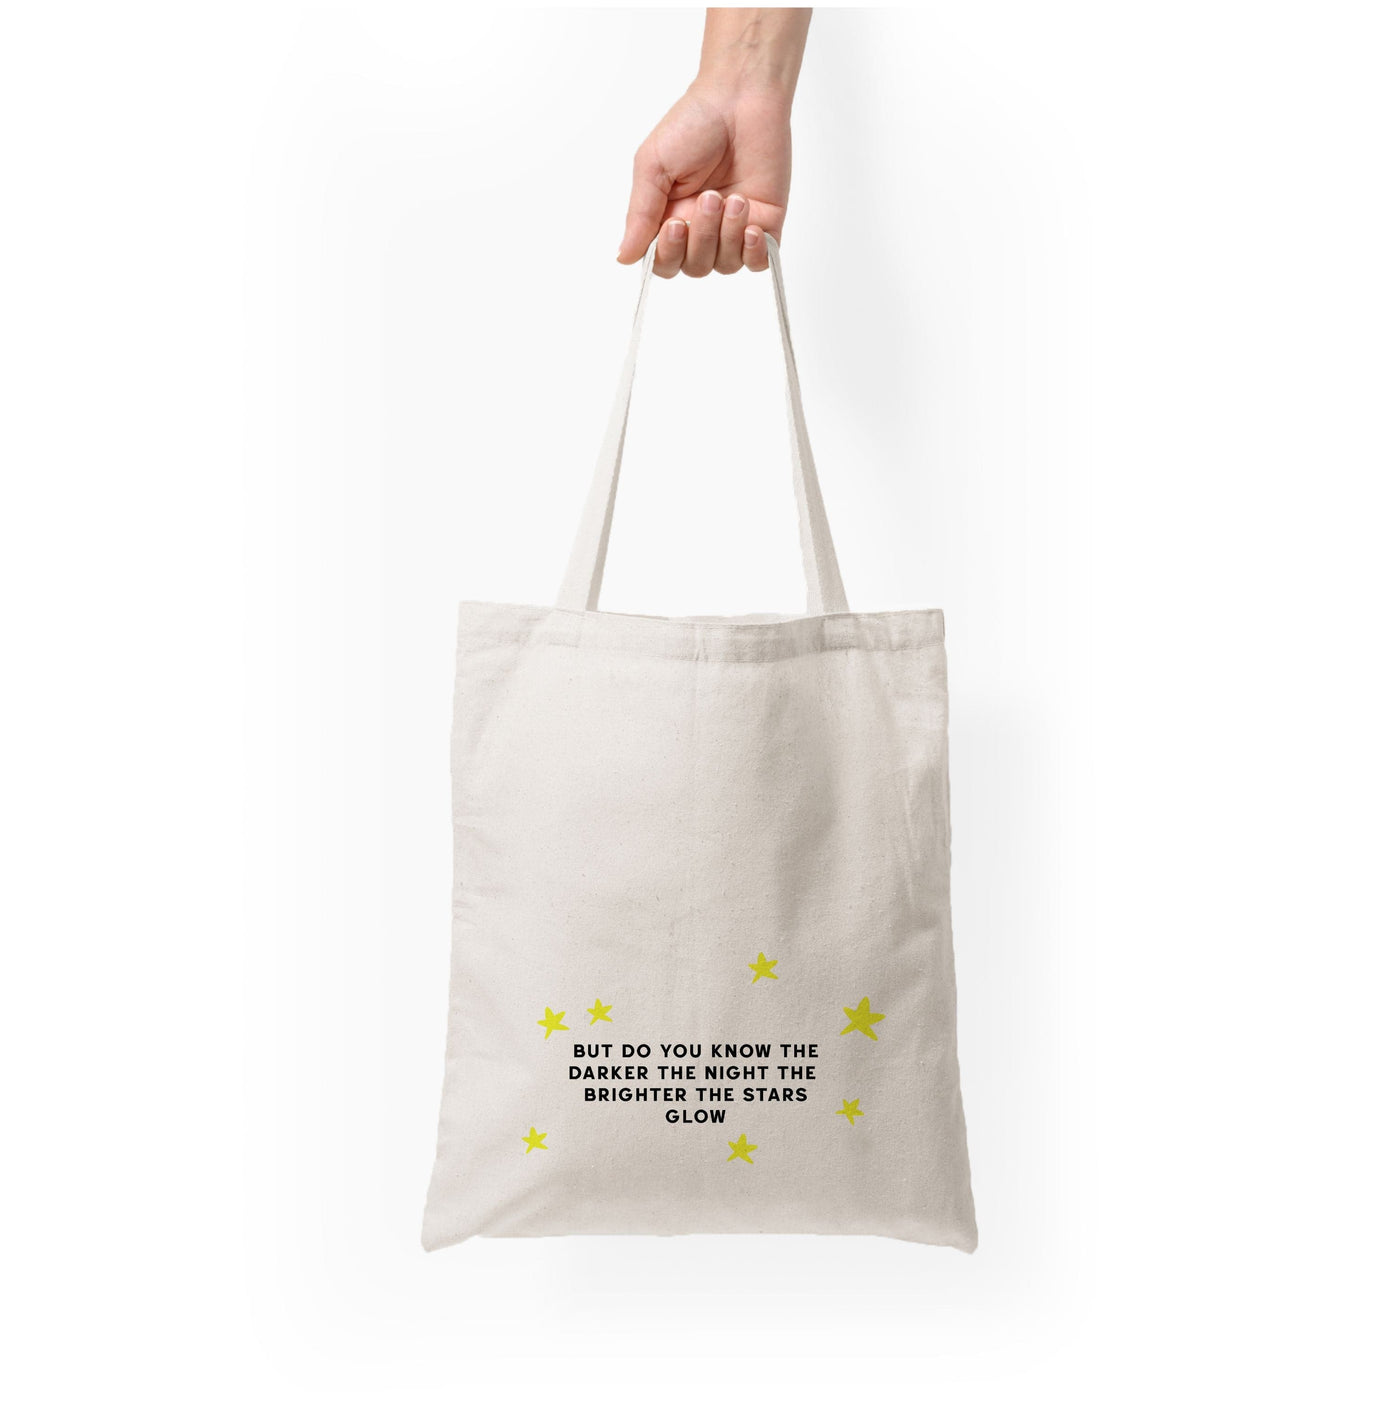 Brighter The Stars Glow - Katy Perry Tote Bag